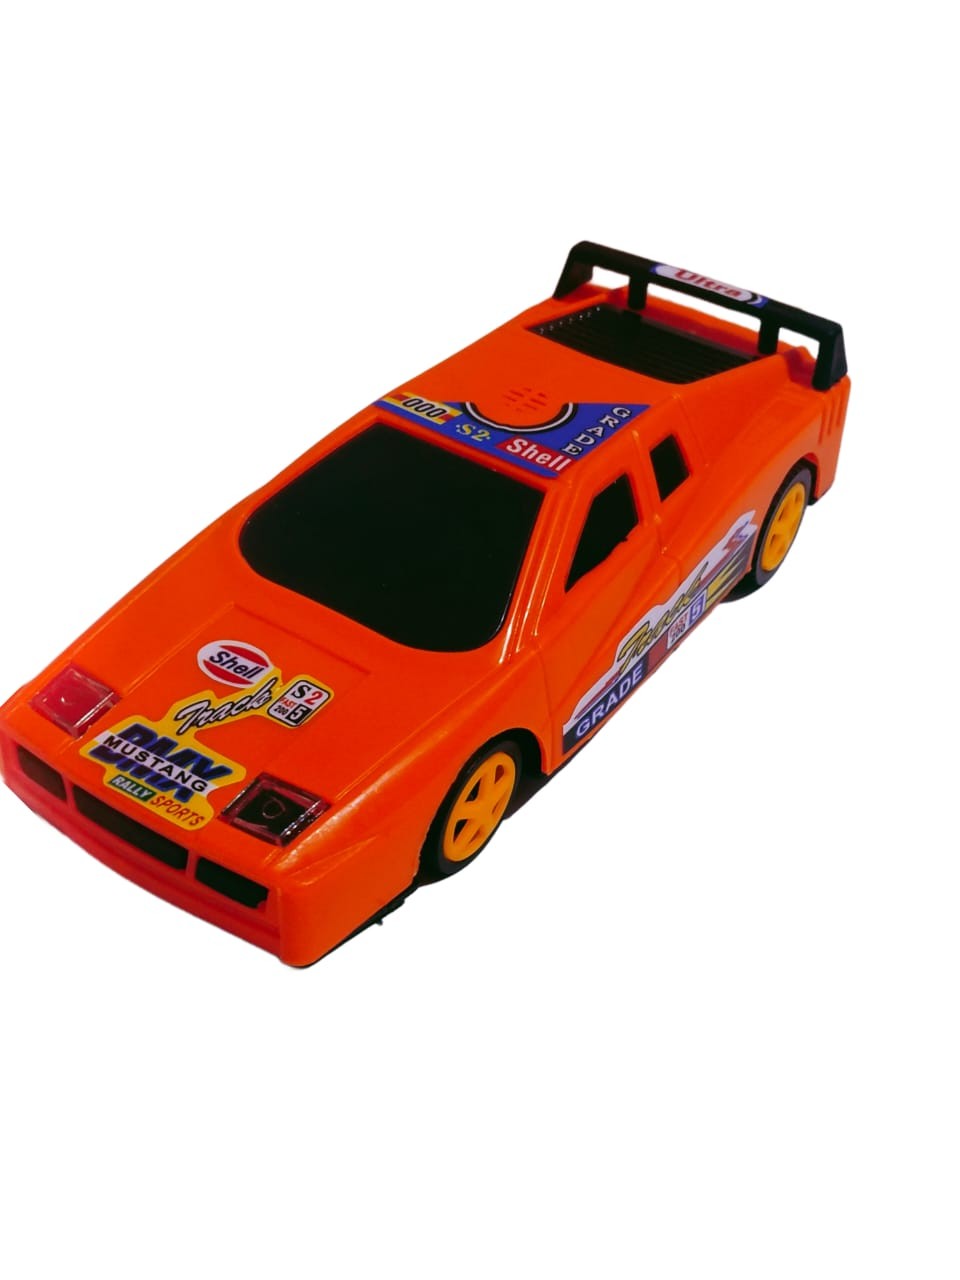 Drag Race Remote Contol Car for Kids, Function of Forward and Backward Motion, Made for Kids (Pack of 1,Colour May Vary)